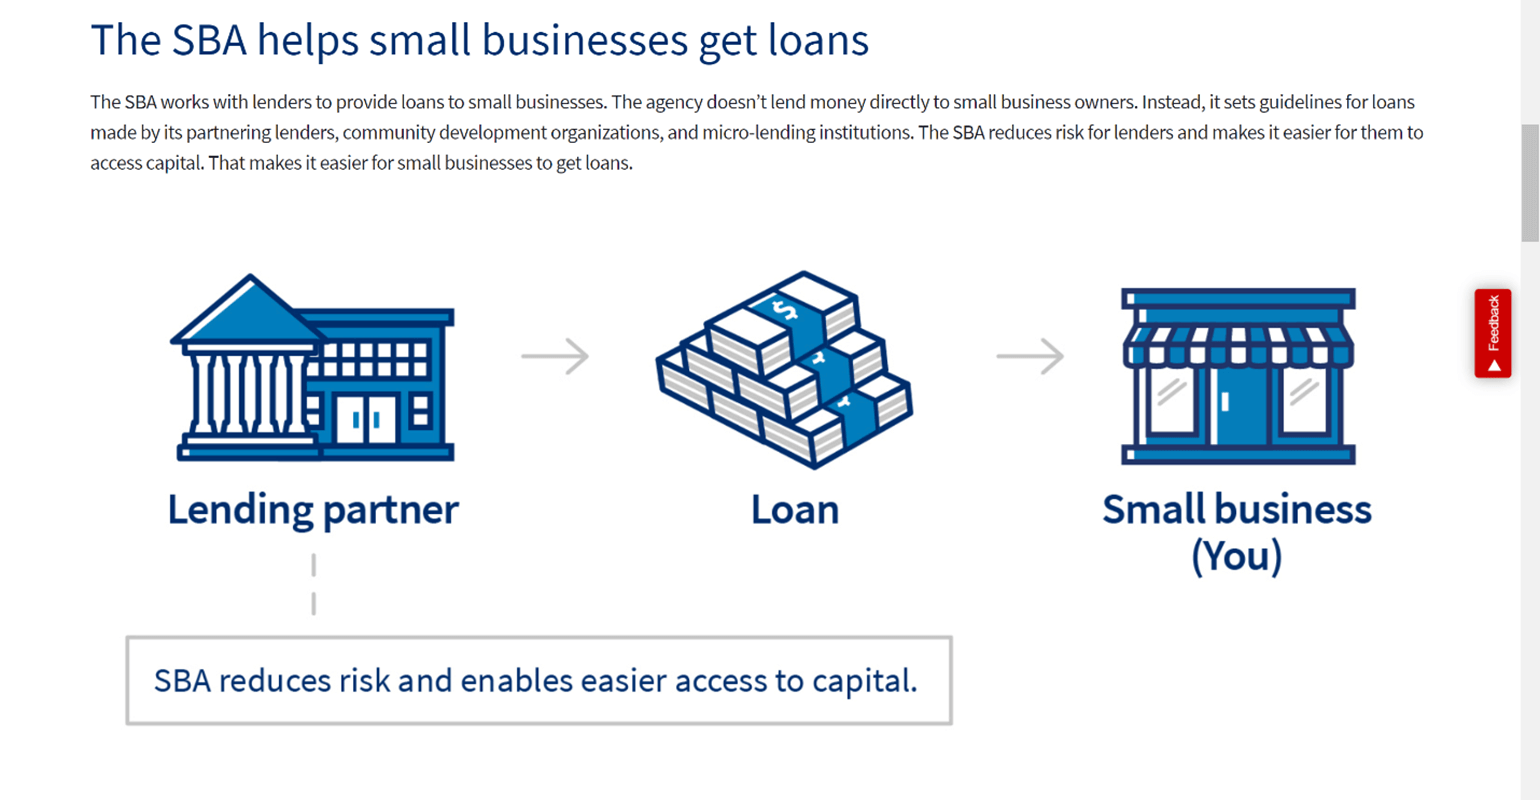 An image from the SBA's website illustrating how loans help entrepreneurs. The first image is a blue illustration of a bank with an arrow pointing to a blue illustration of a stack of dollar bills. An arrow from the stack of money points to a blue illustration of a store front, representing your future business. Text above this image reads 'The SBA works with lenders to provide loans to small businesses. The agency doesn't lend money directly to small business owners. Instead, it sets guidelines for loans made by its partnering lenders, community development organizations, and micro-lending institutions. The SBA reduces risk for lenders and makes it easier for them to access capital. That makes it easier for small businesses to get loans.'